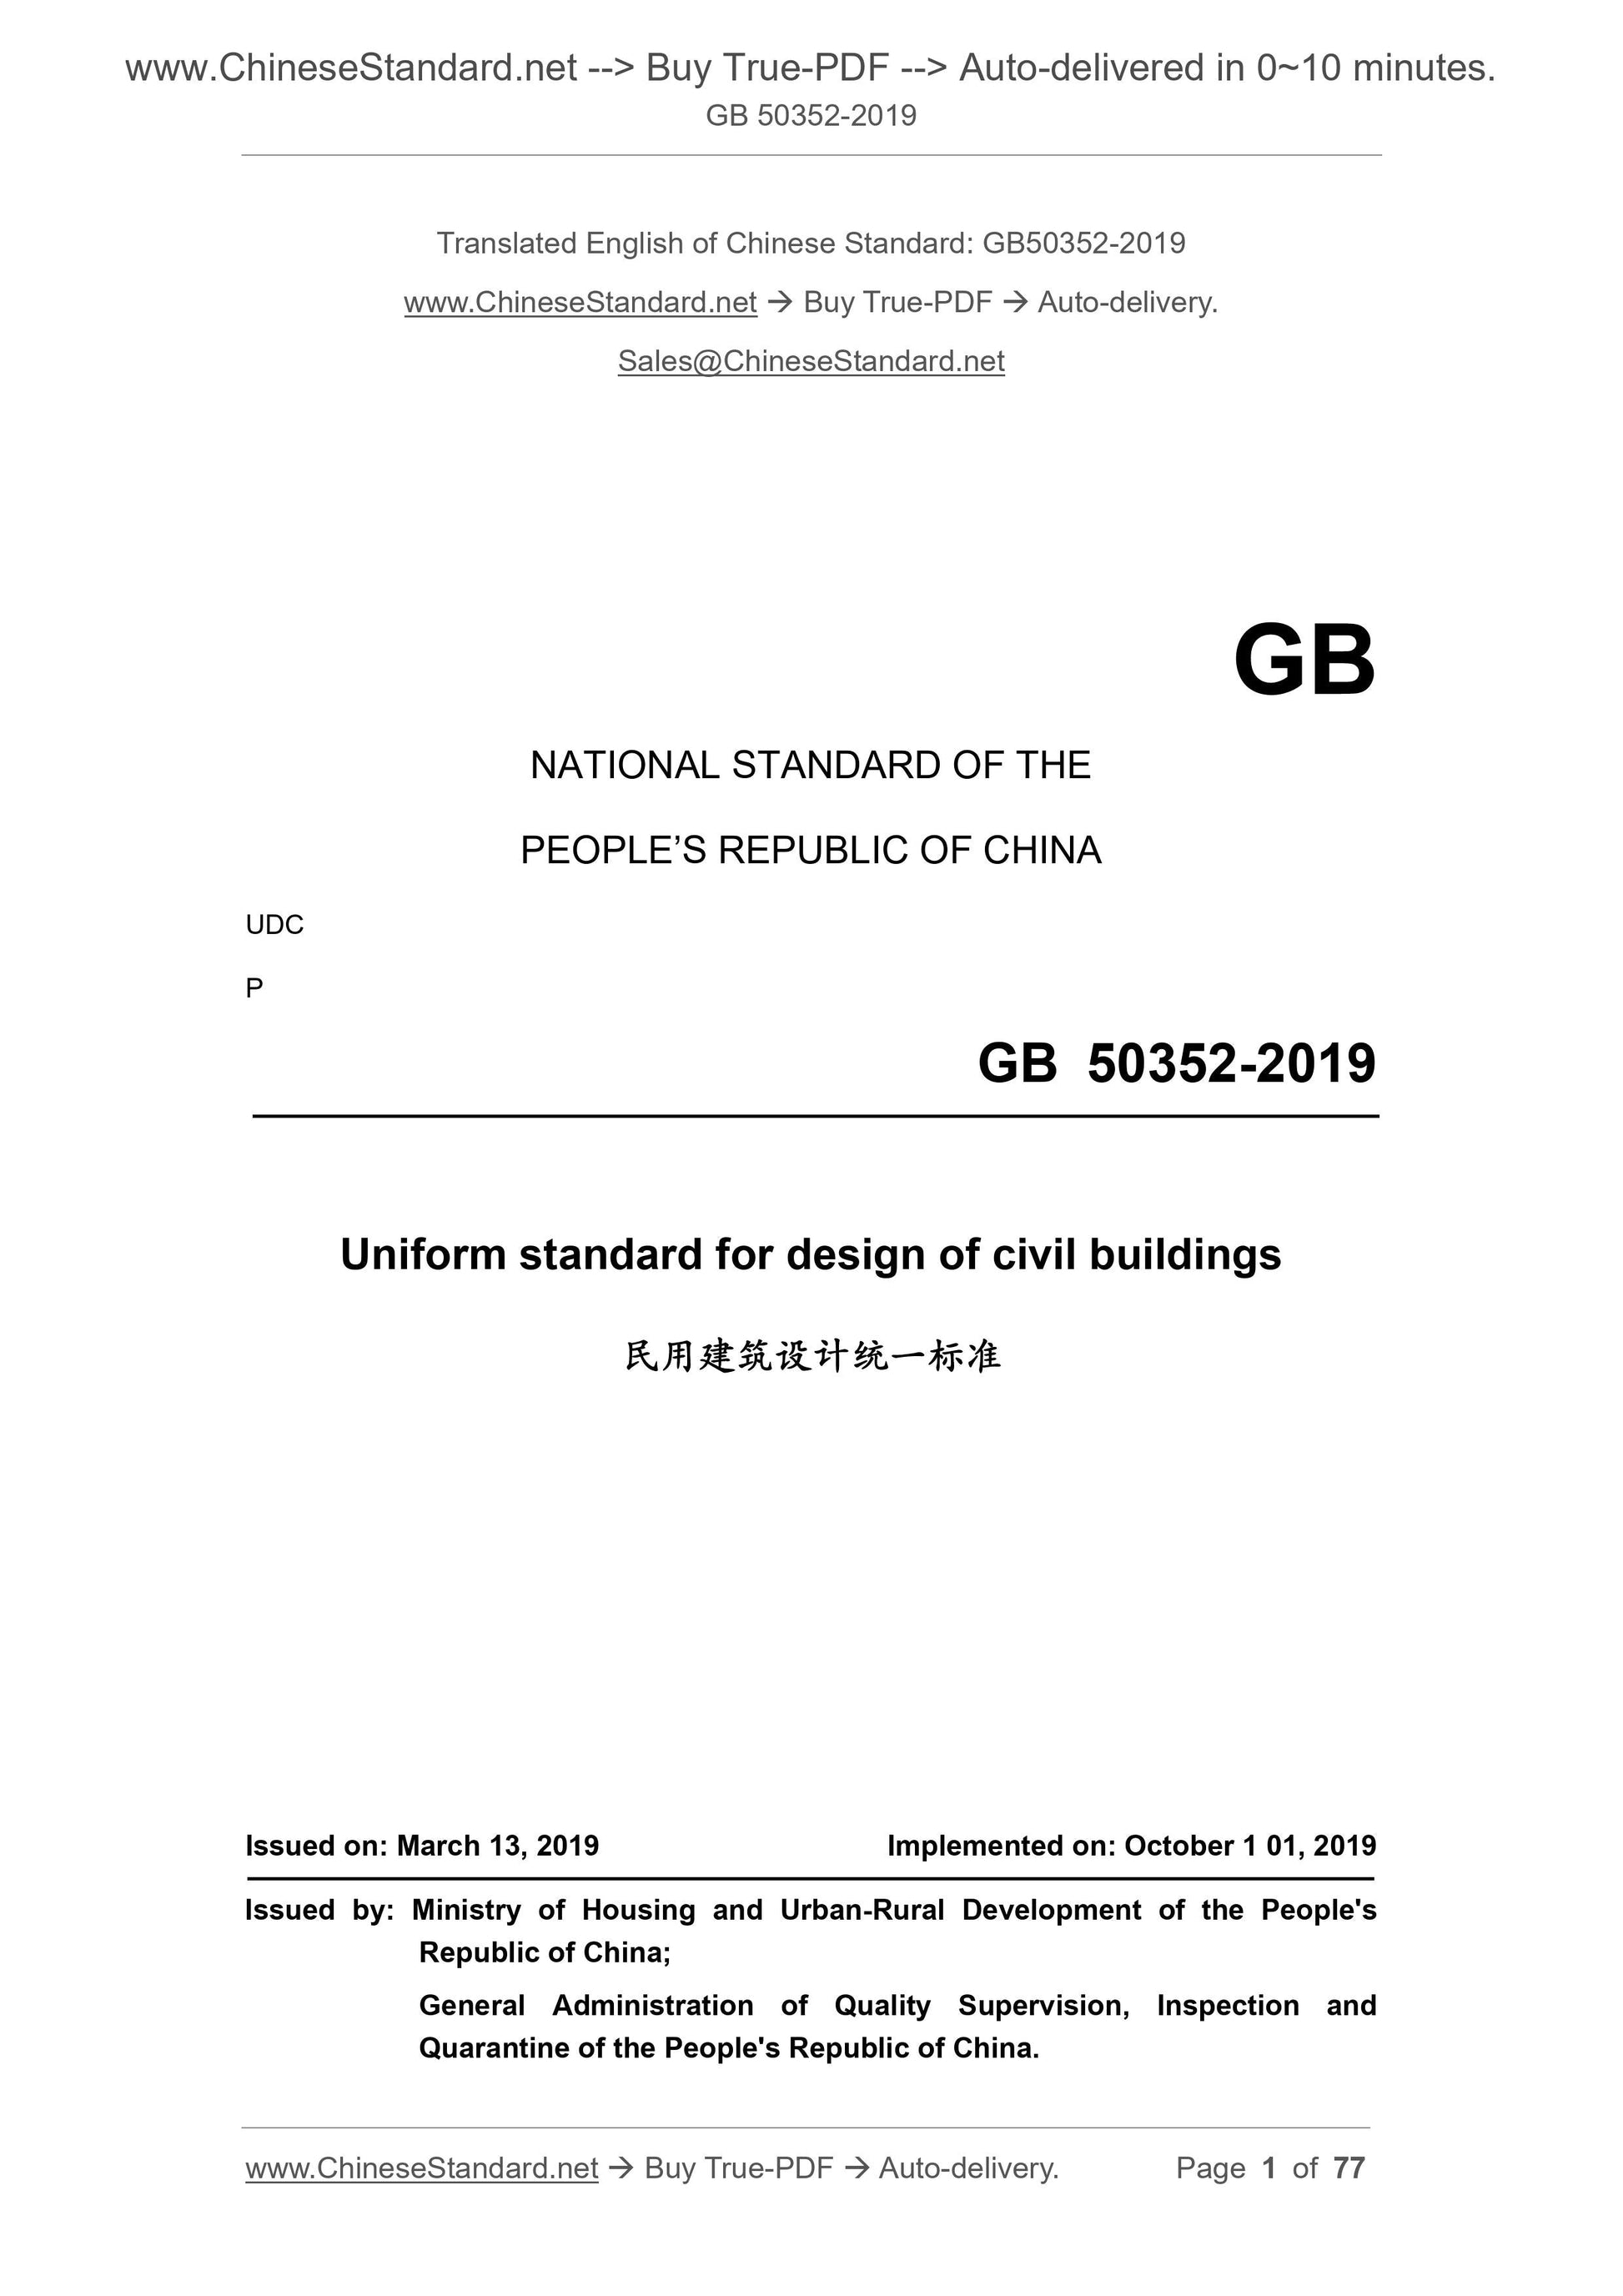 GB 50352-2019 Page 1